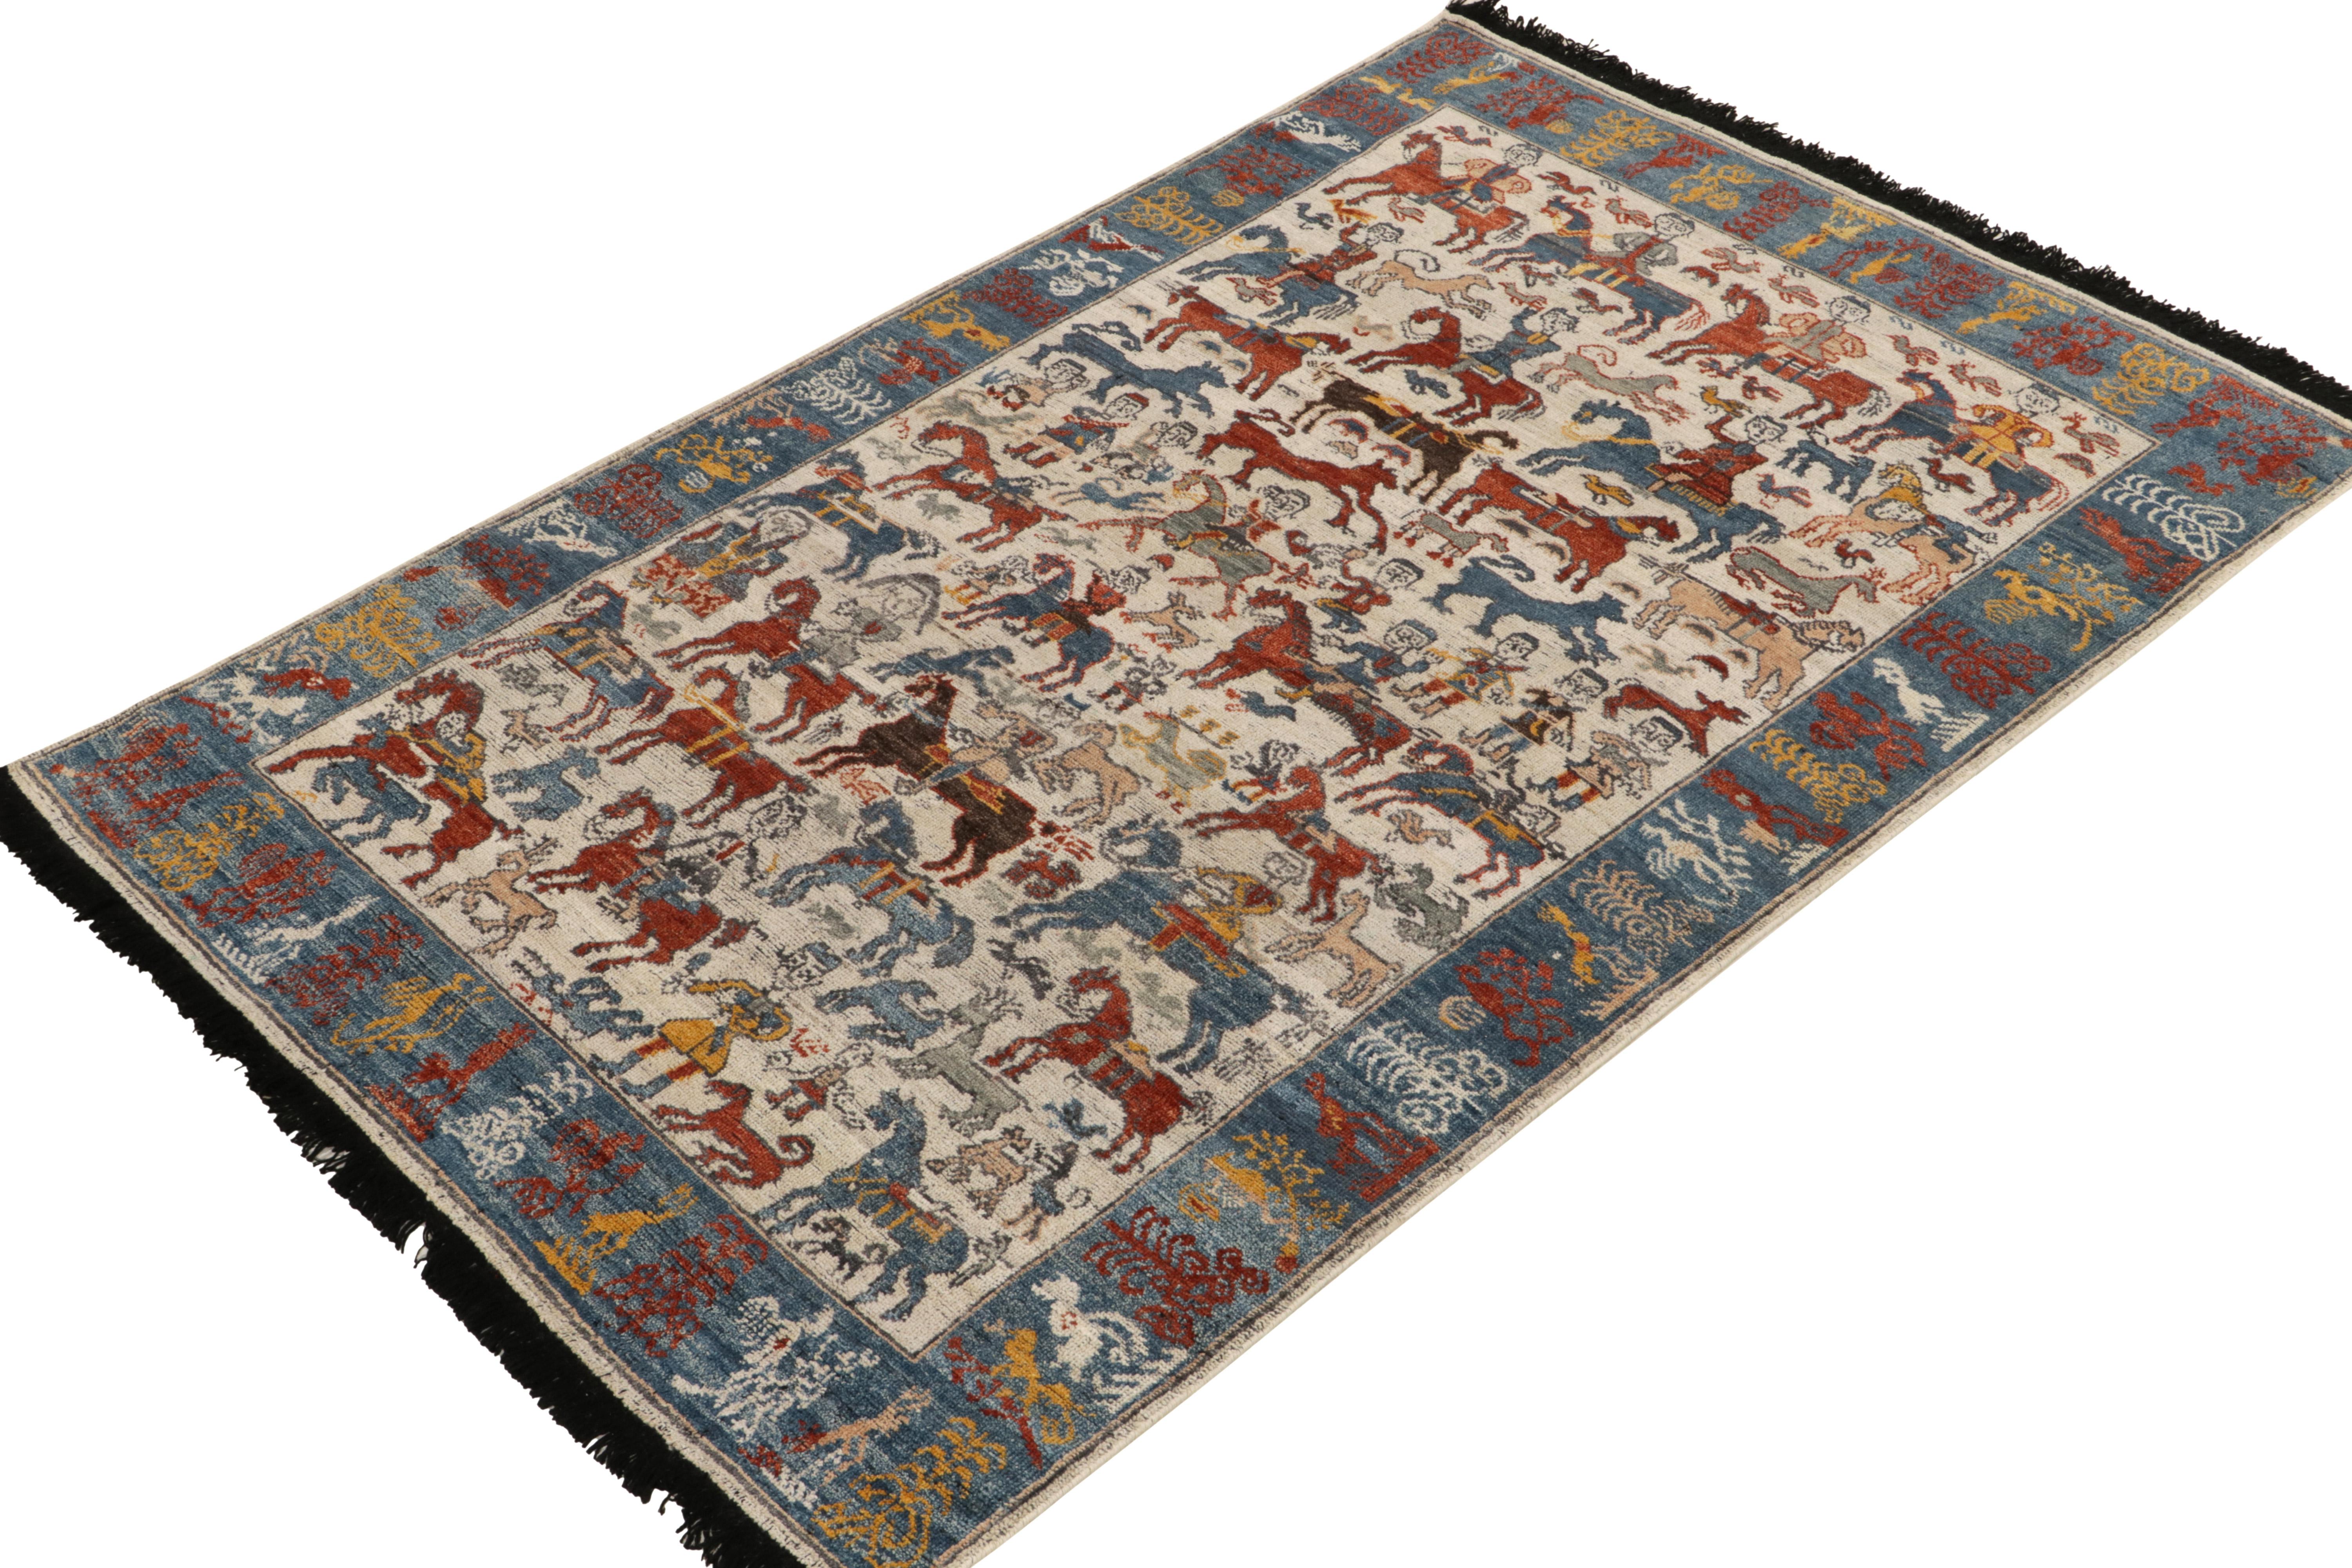 Indian Rug & Kilim's Classic Tribal Style Rug in White, Blue and Red Pictorial Pattern For Sale